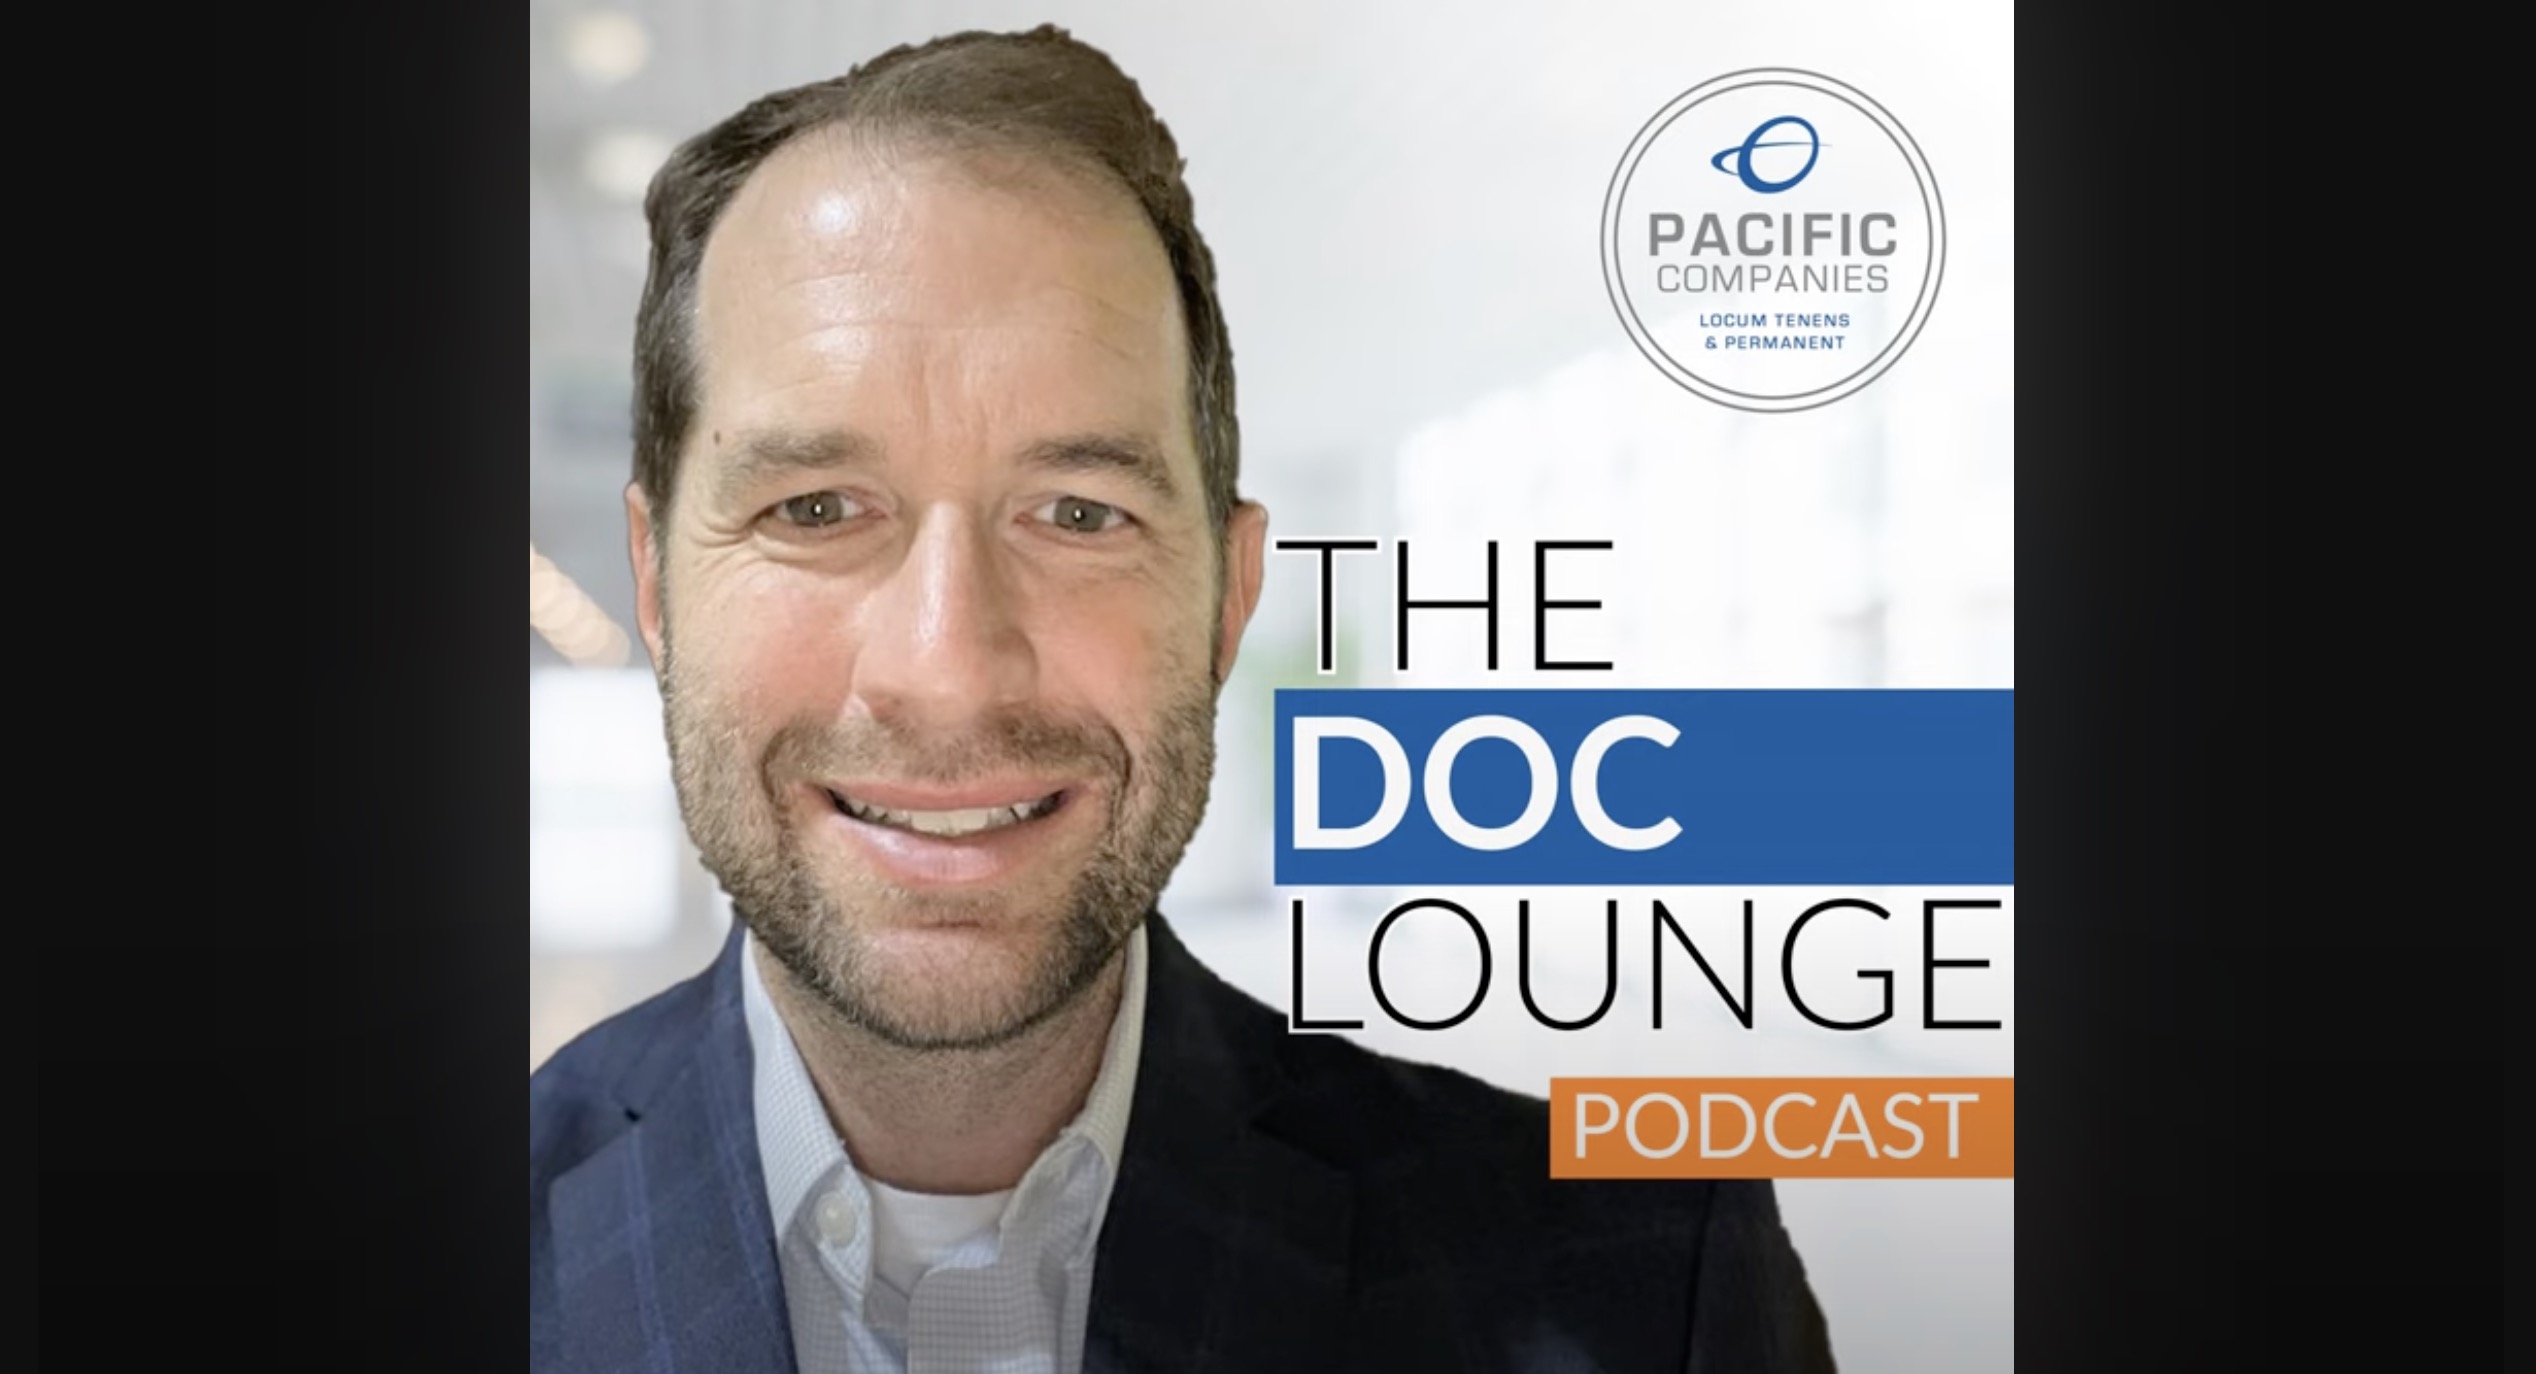 The Doc Lounge Podcast with a headshot from Allen